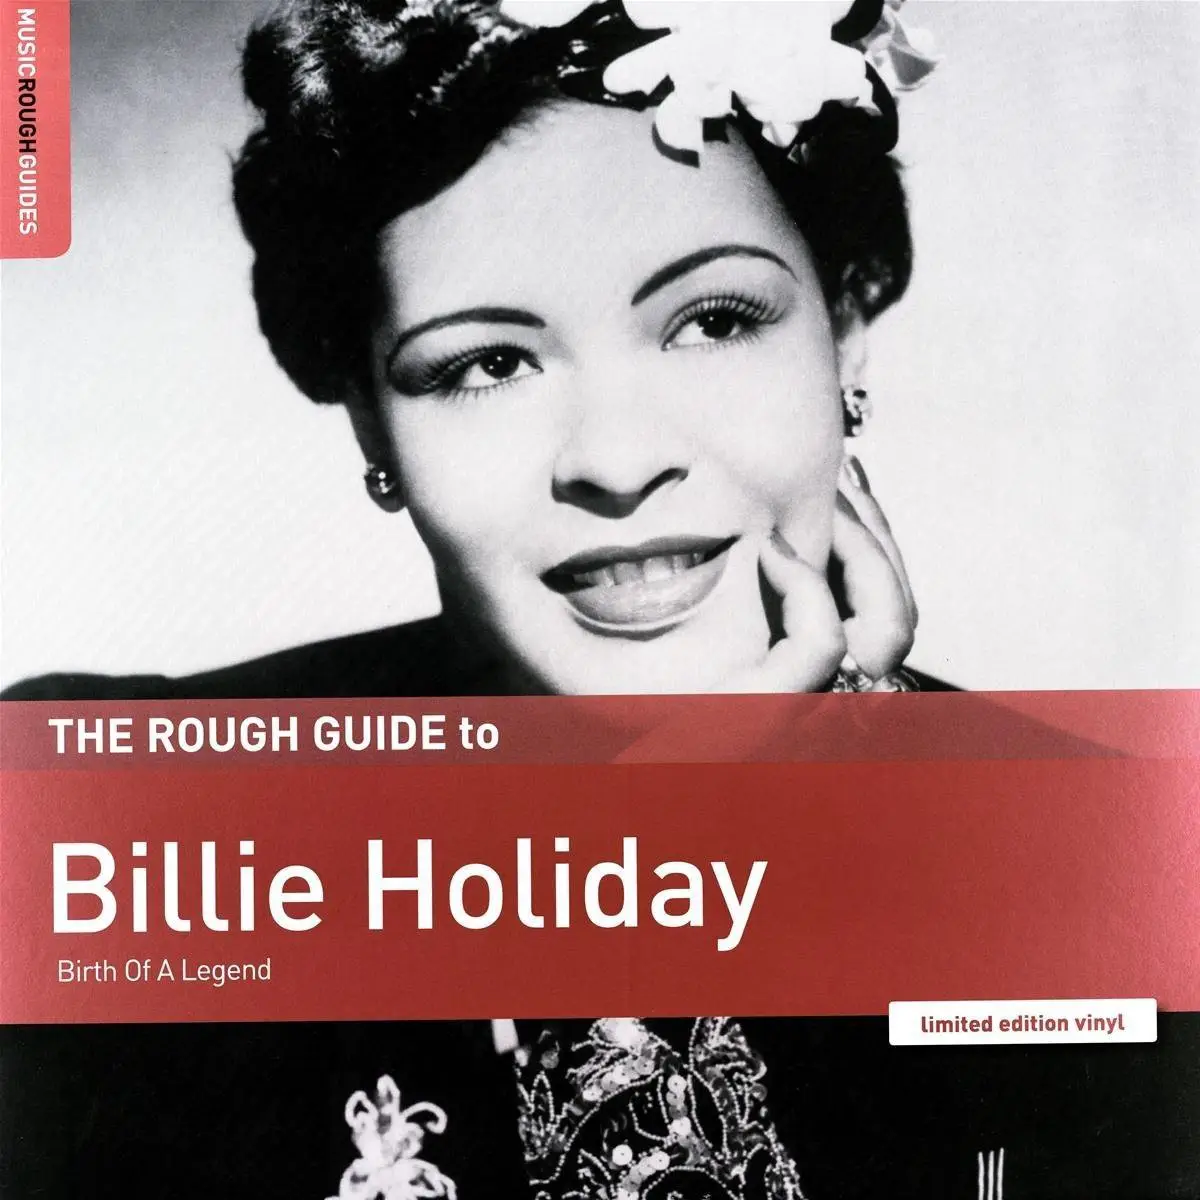 Billie Holiday The Rough Guide To Billie Holiday Birth Of A Legend 2019 Avaxhome